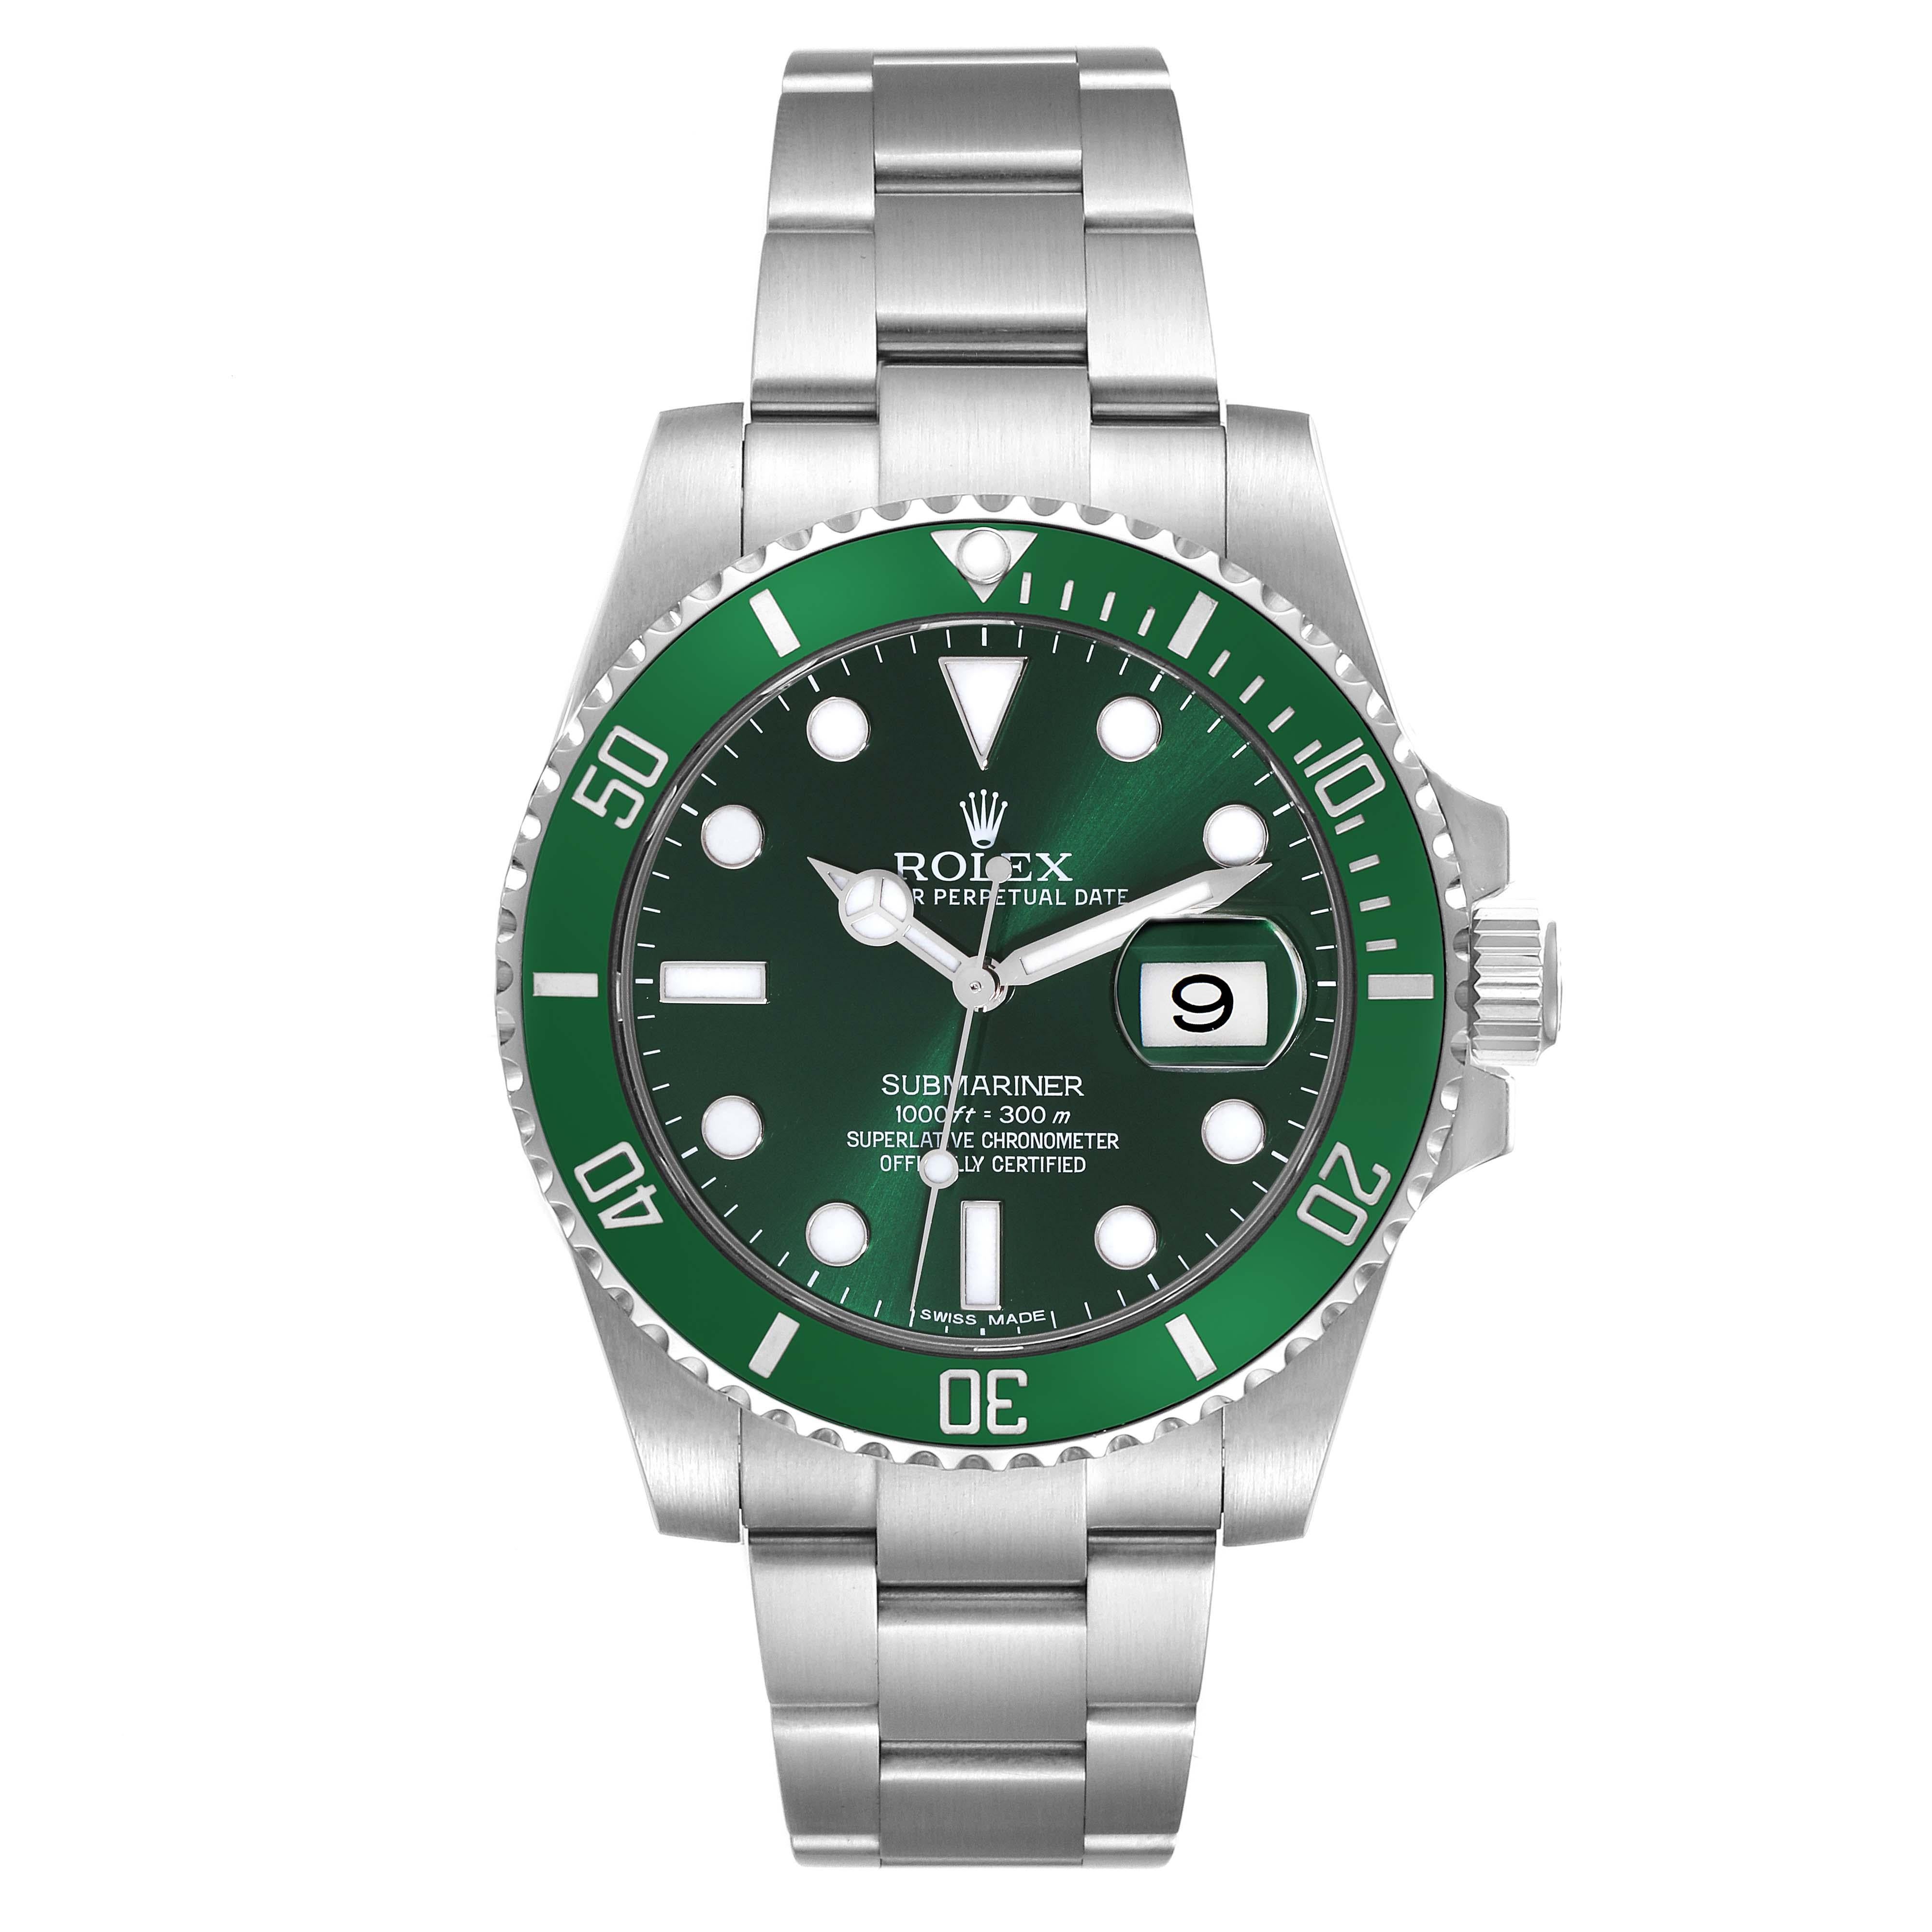 Rolex Submariner Hulk Green Dial Steel Mens Watch 116610LV Box Card. Officially certified chronometer automatic self-winding movement. Stainless steel oyster case 40 mm in diameter. Rolex logo on the crown. Special time-lapse unidirectional rotating